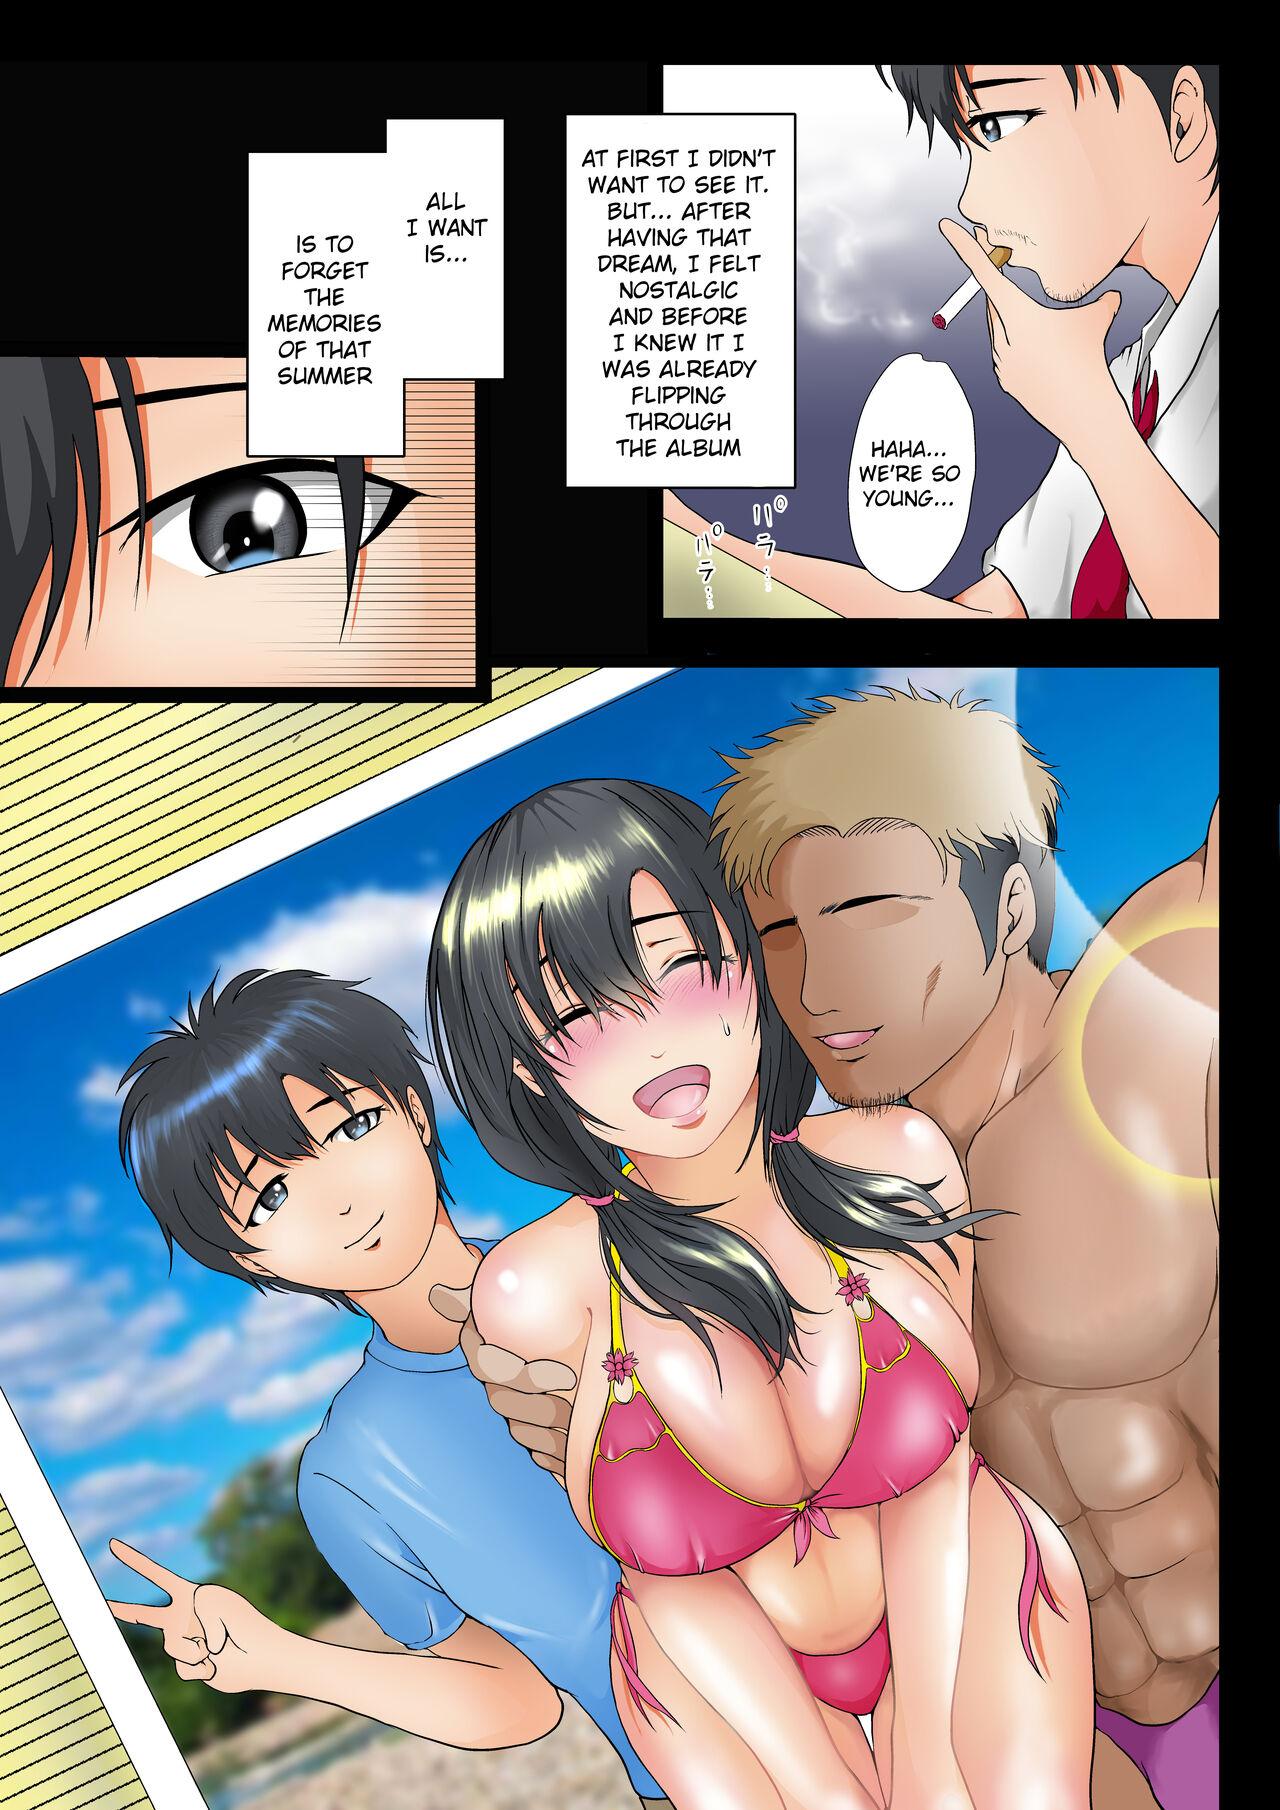 Yanks Featured The reason why the bond with my childhood friend is broken so easily - Original Tanned - Page 6